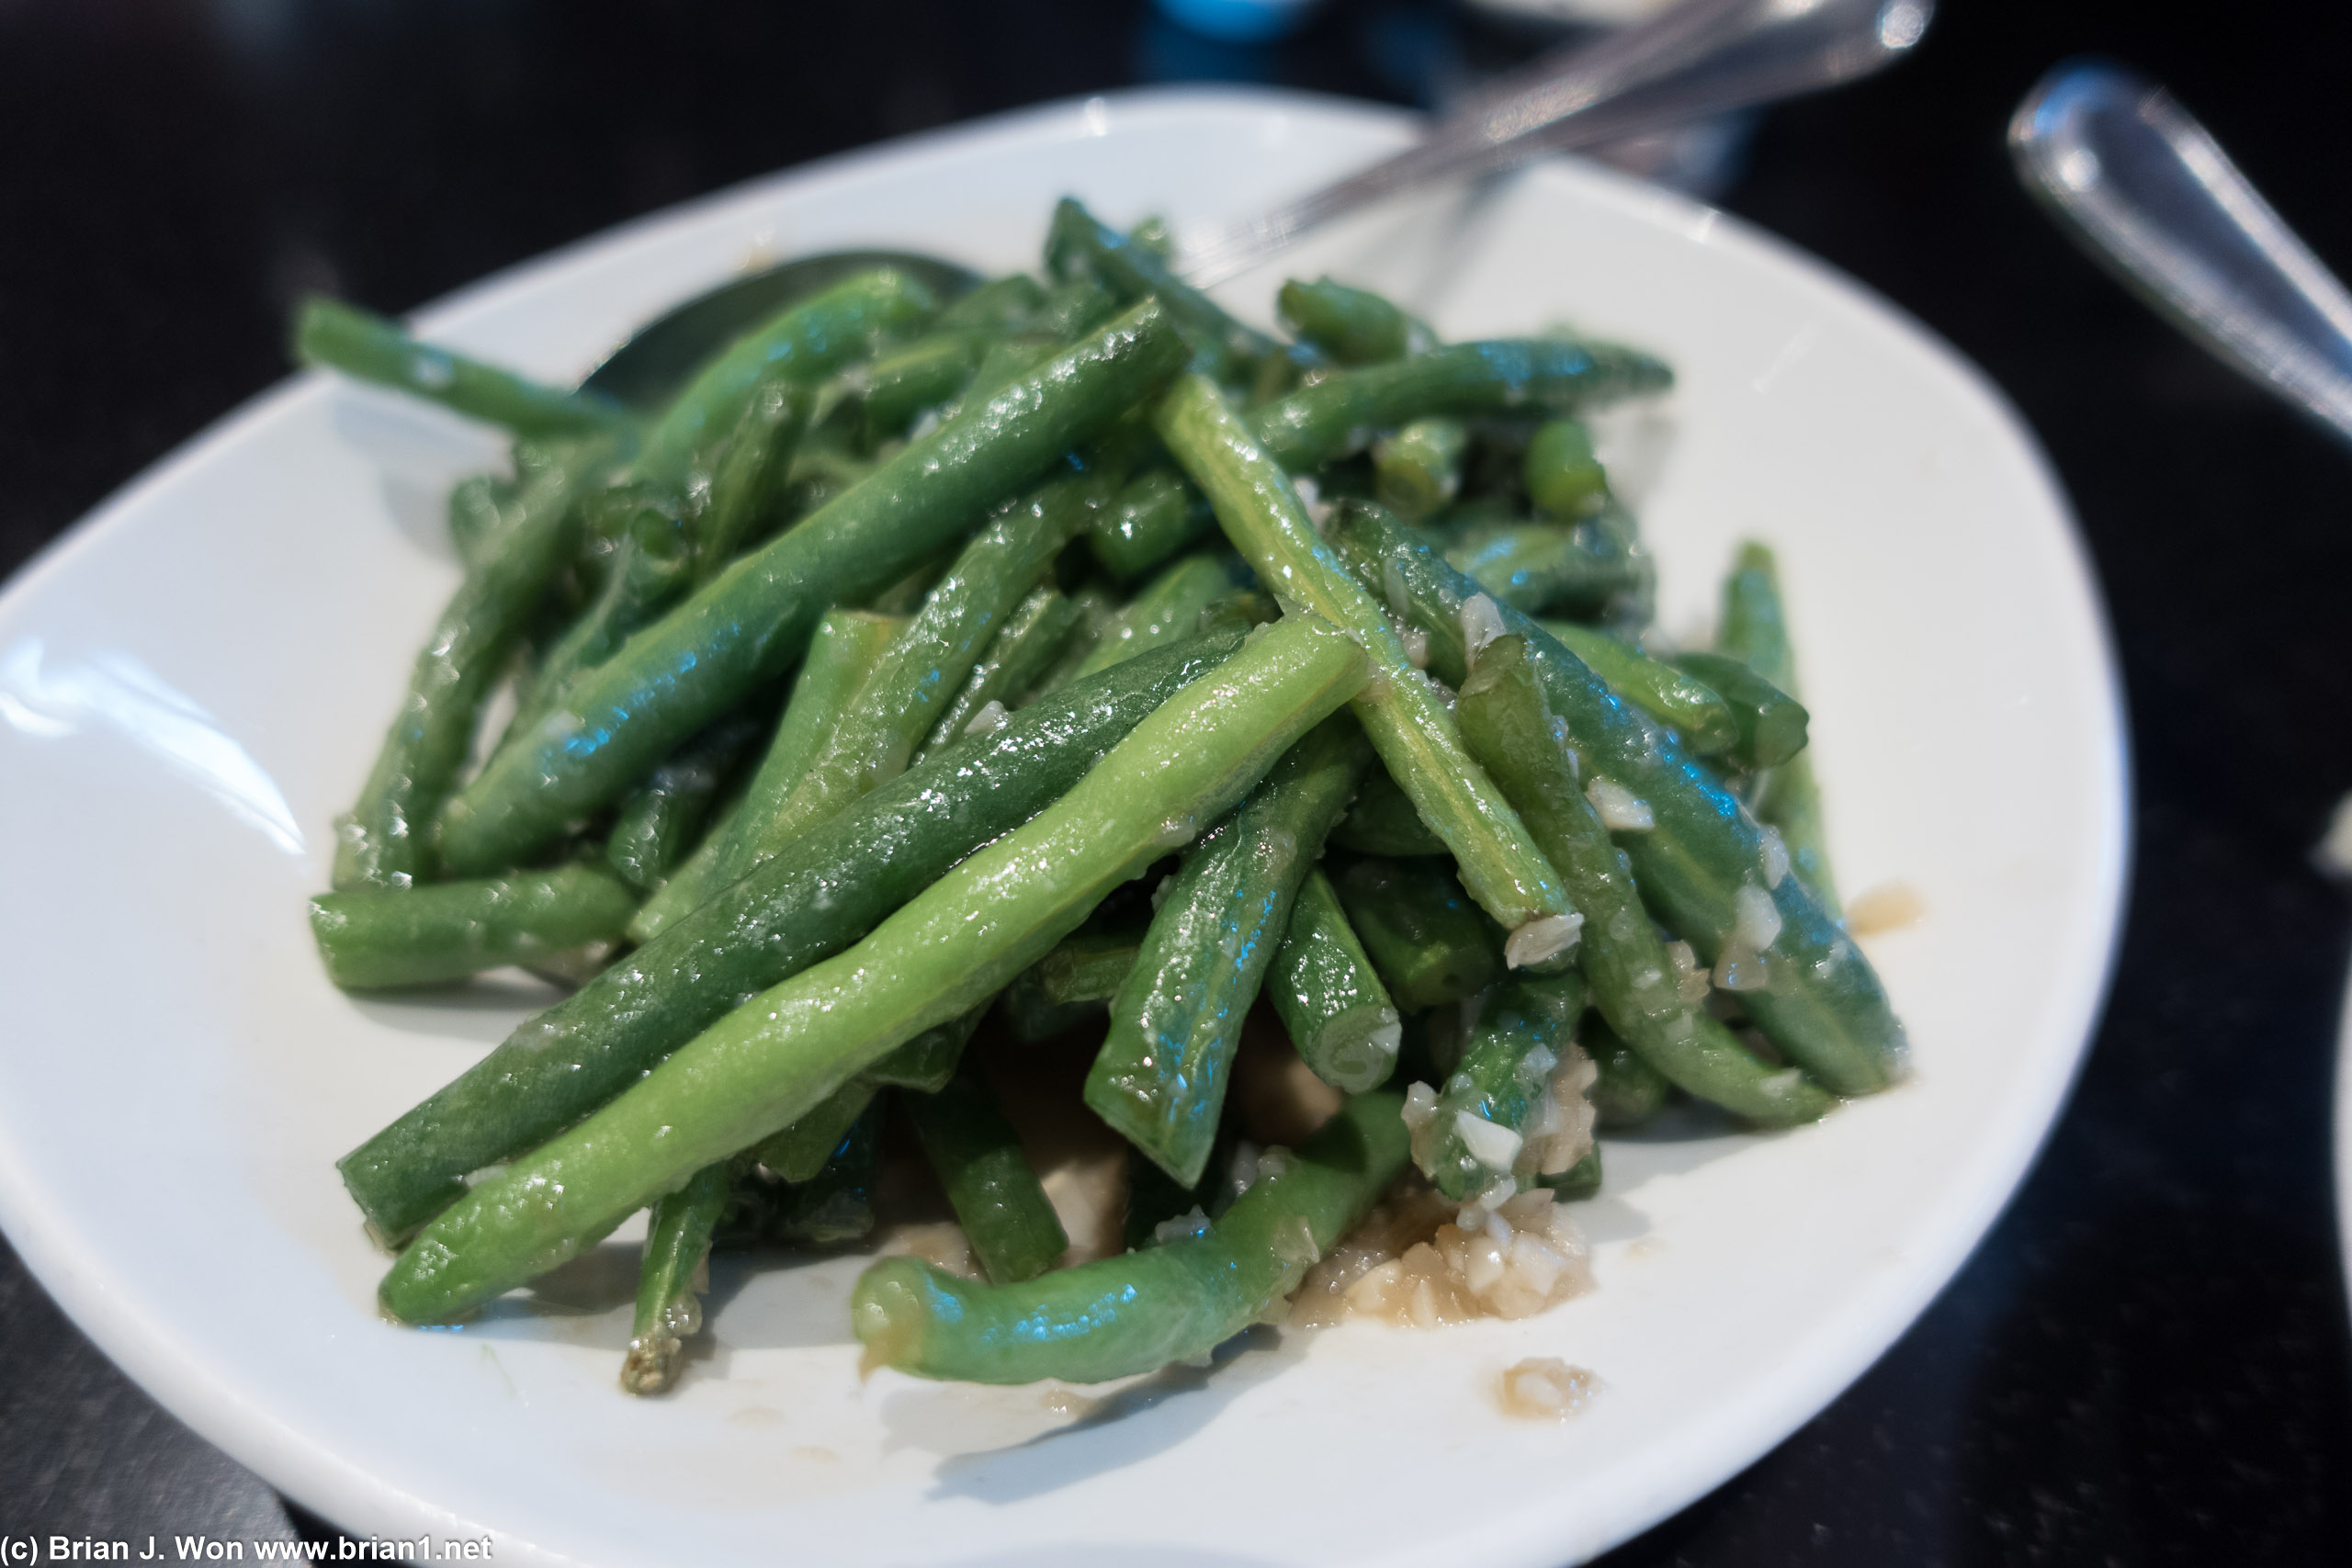 String beans are always good, too.